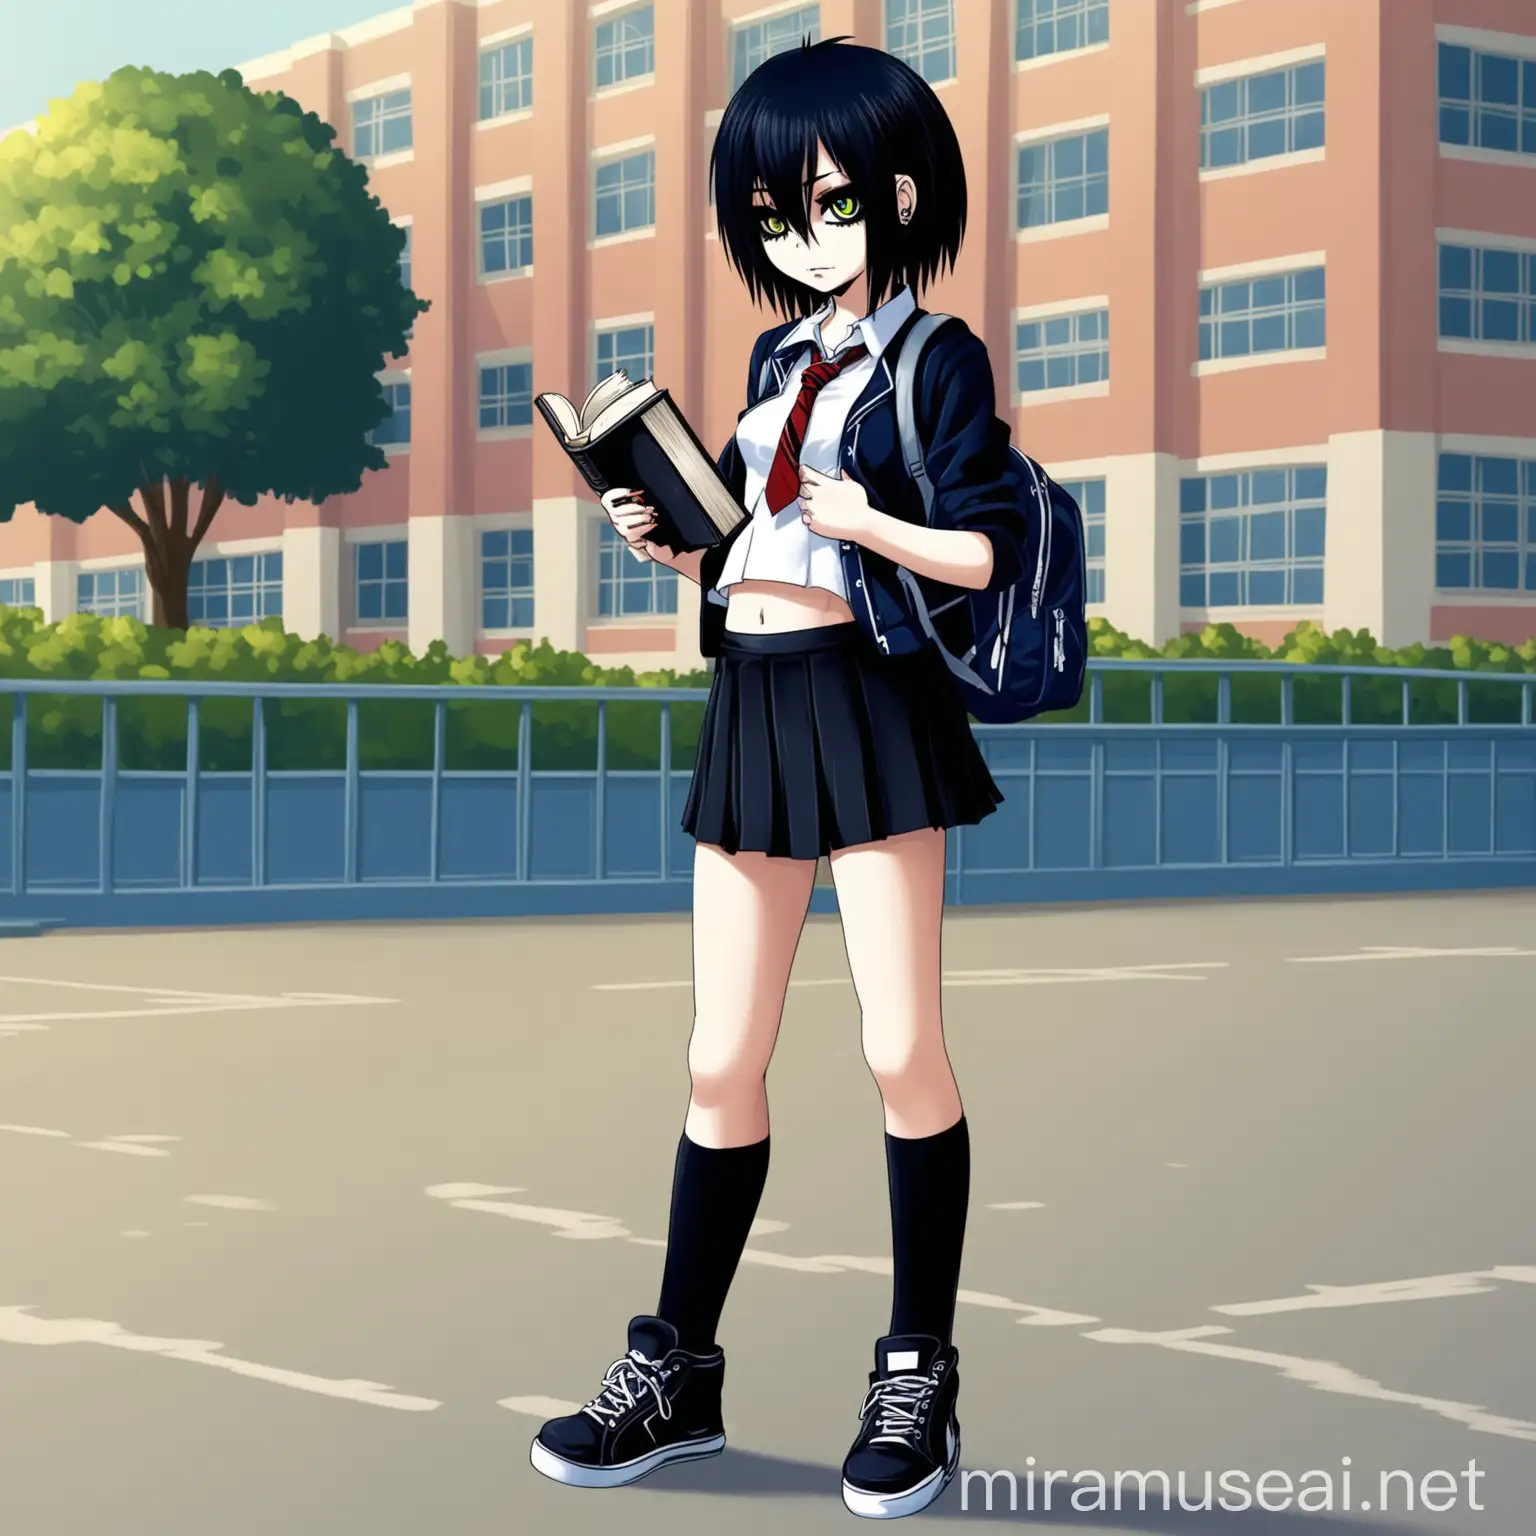 Fullbody, girl, highschooler,emo, holding book, tight clothes, petite,small waist, tight thighs,small chest, school background